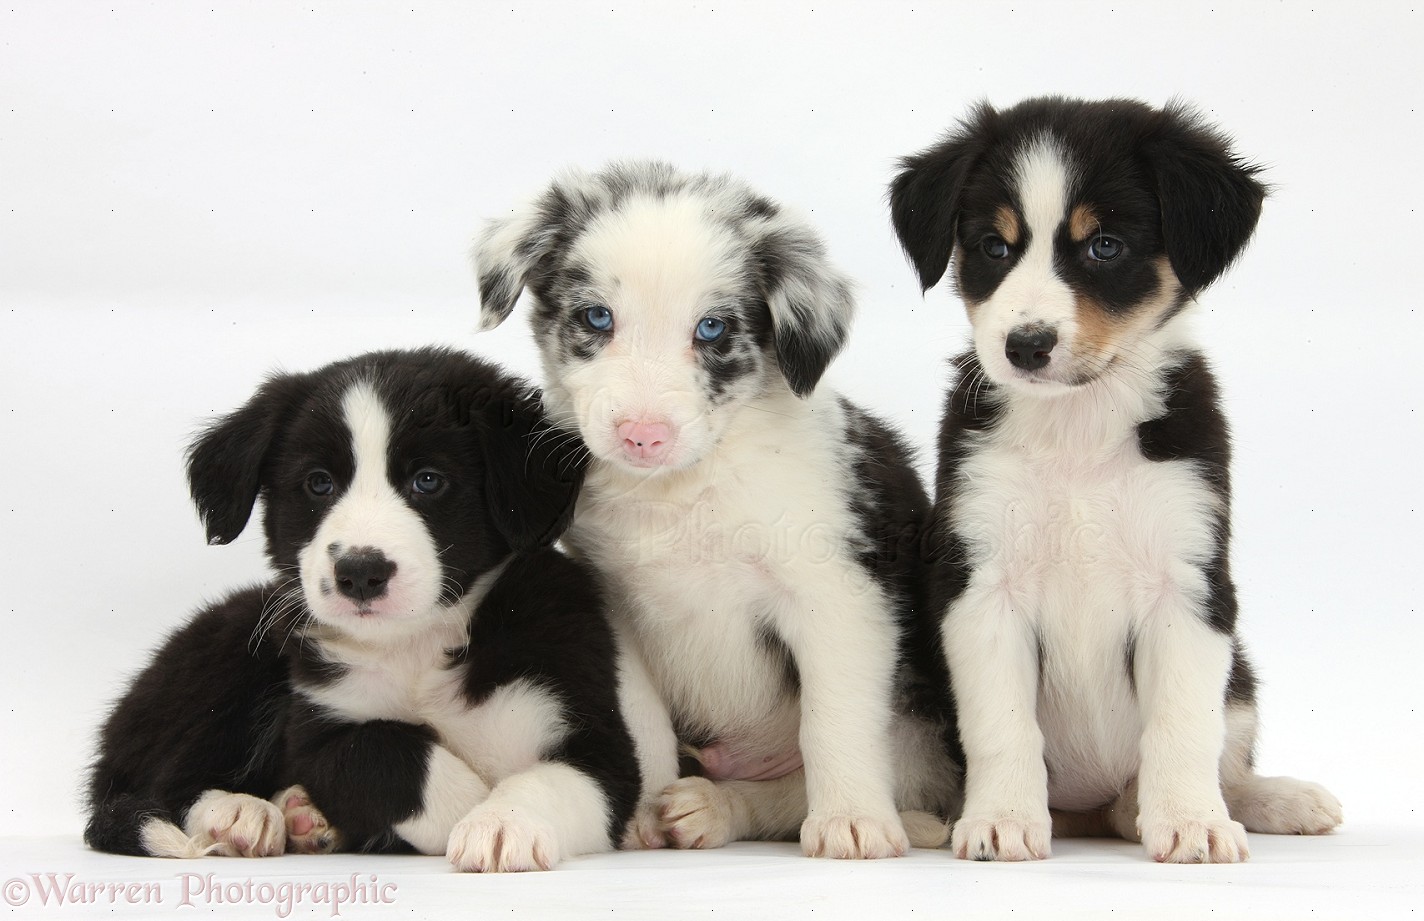 Border Collies are the smartest breed of dogs and also the